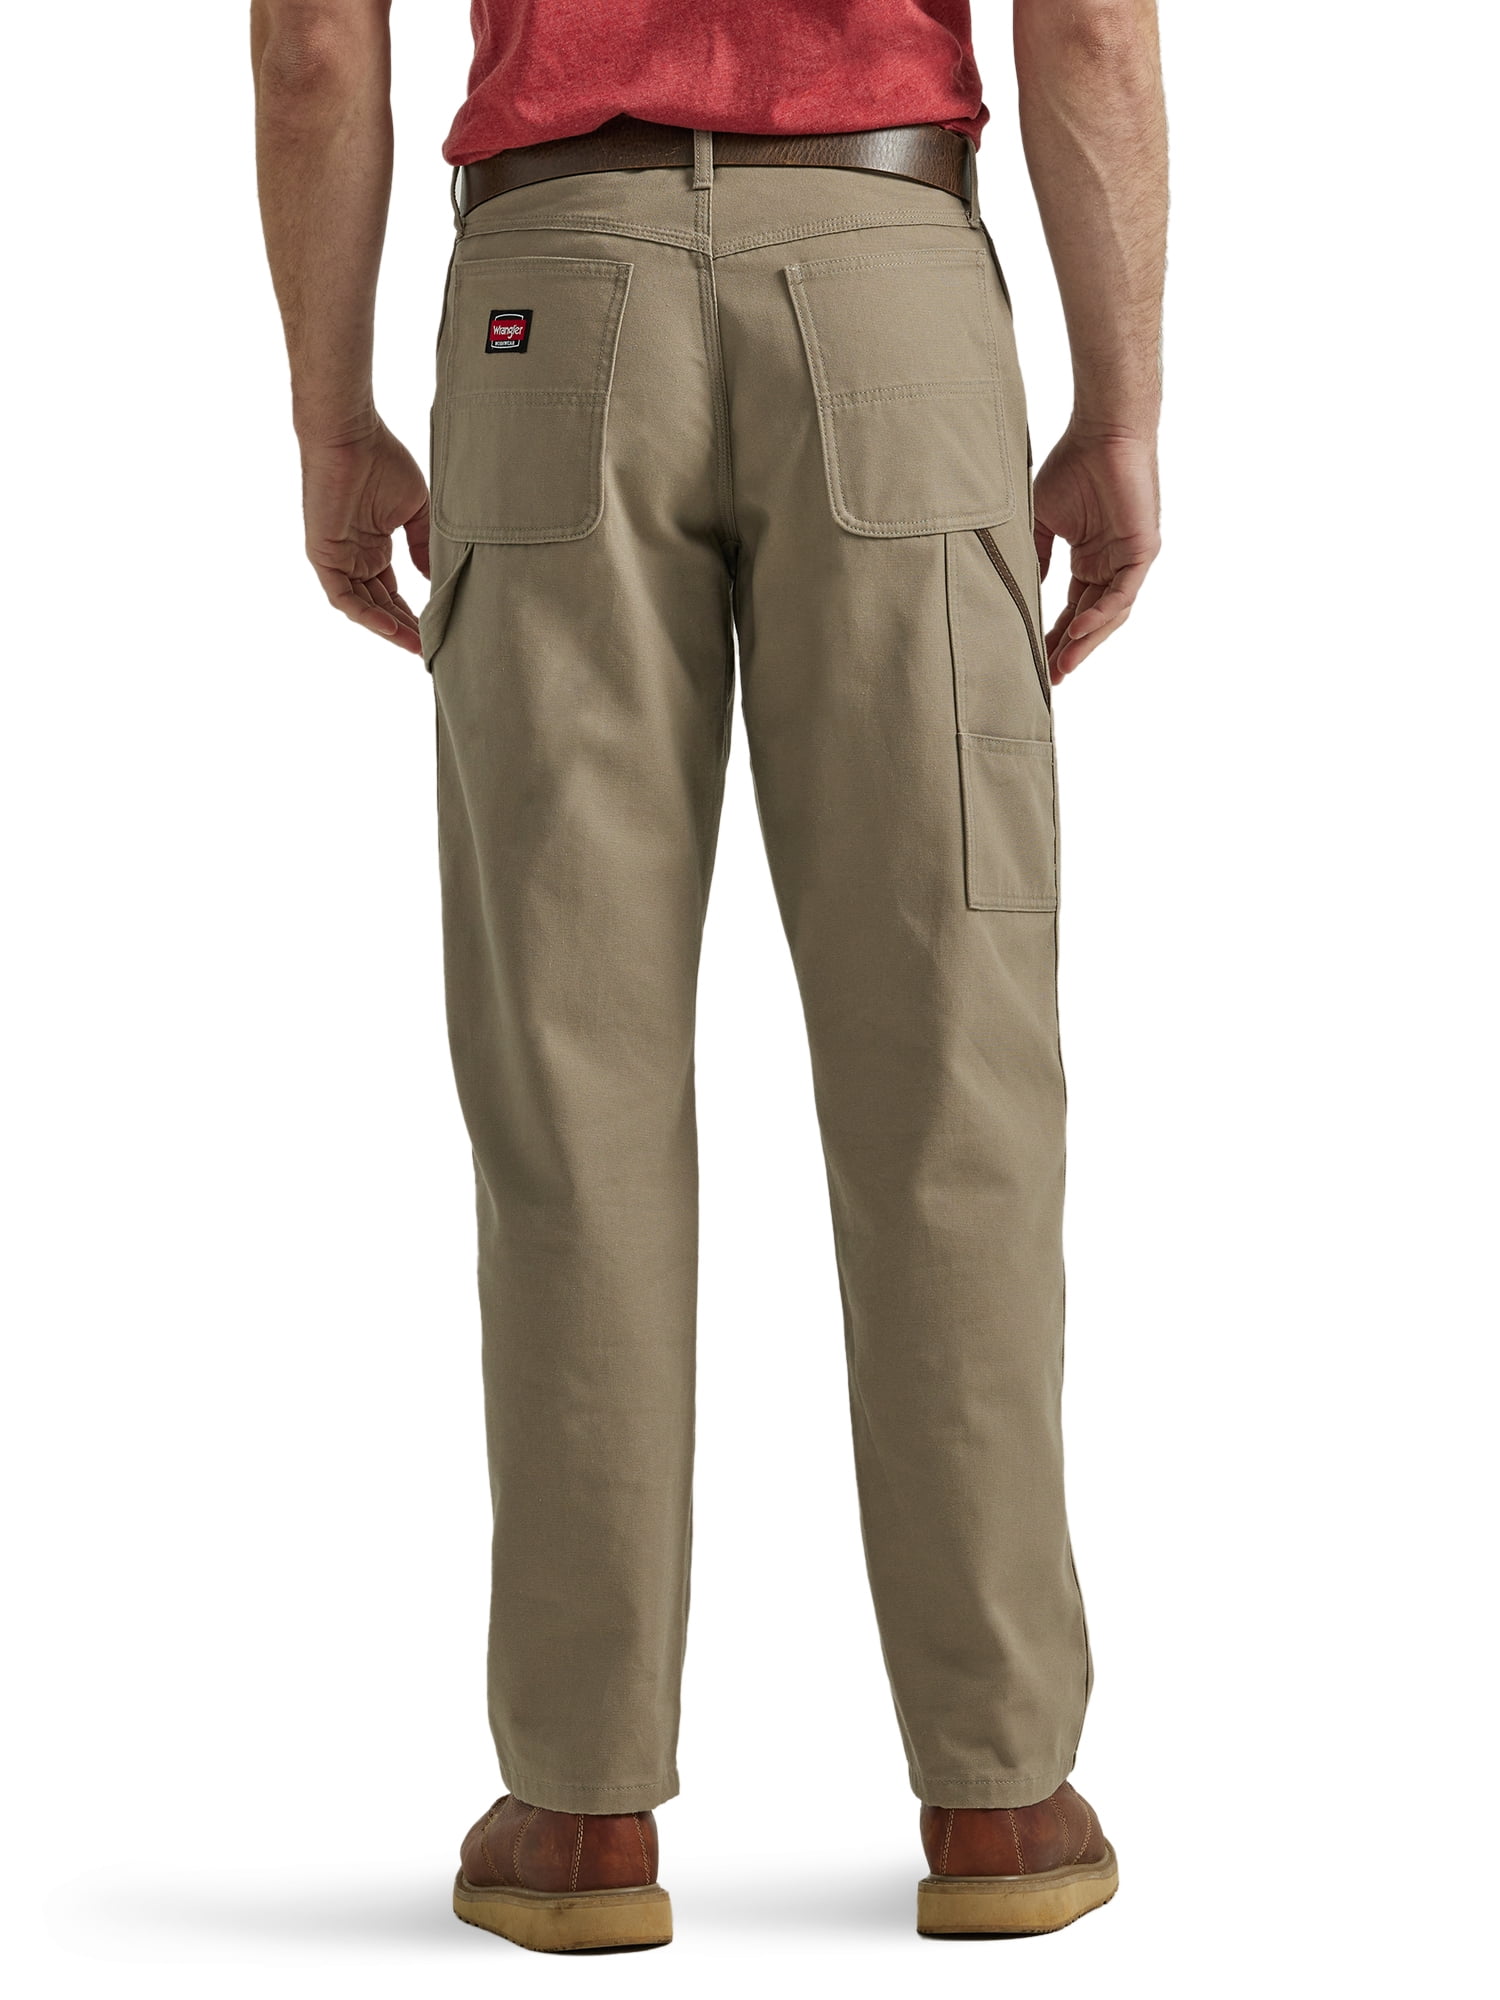 DICKIES Men's Work Relaxed Fit Olive Green Carpenter Pants 44x30. C pics